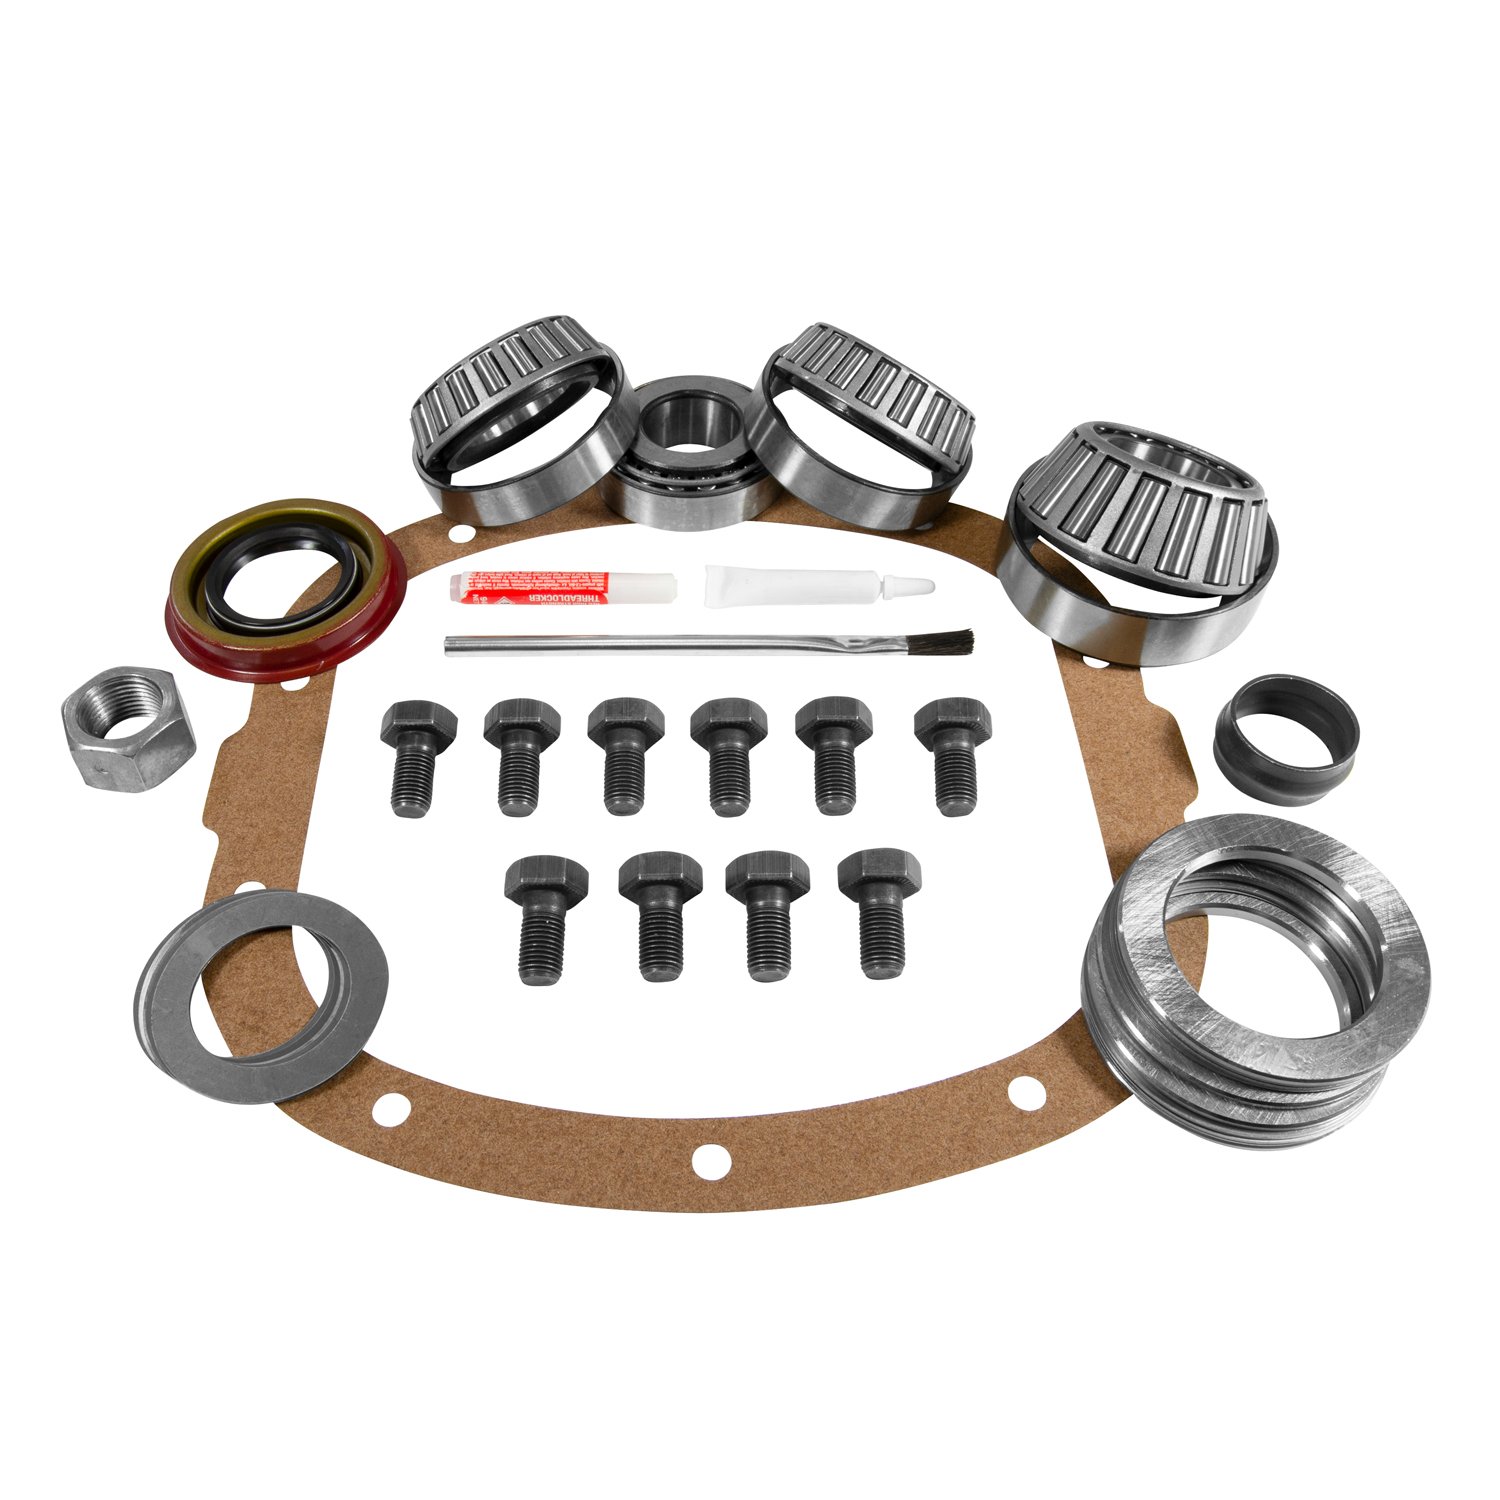 USA Standard ZK GM7.5-B Master Overhaul Kit, For The '82-'99 GM 7.5 in. And 7.625 in. Differential